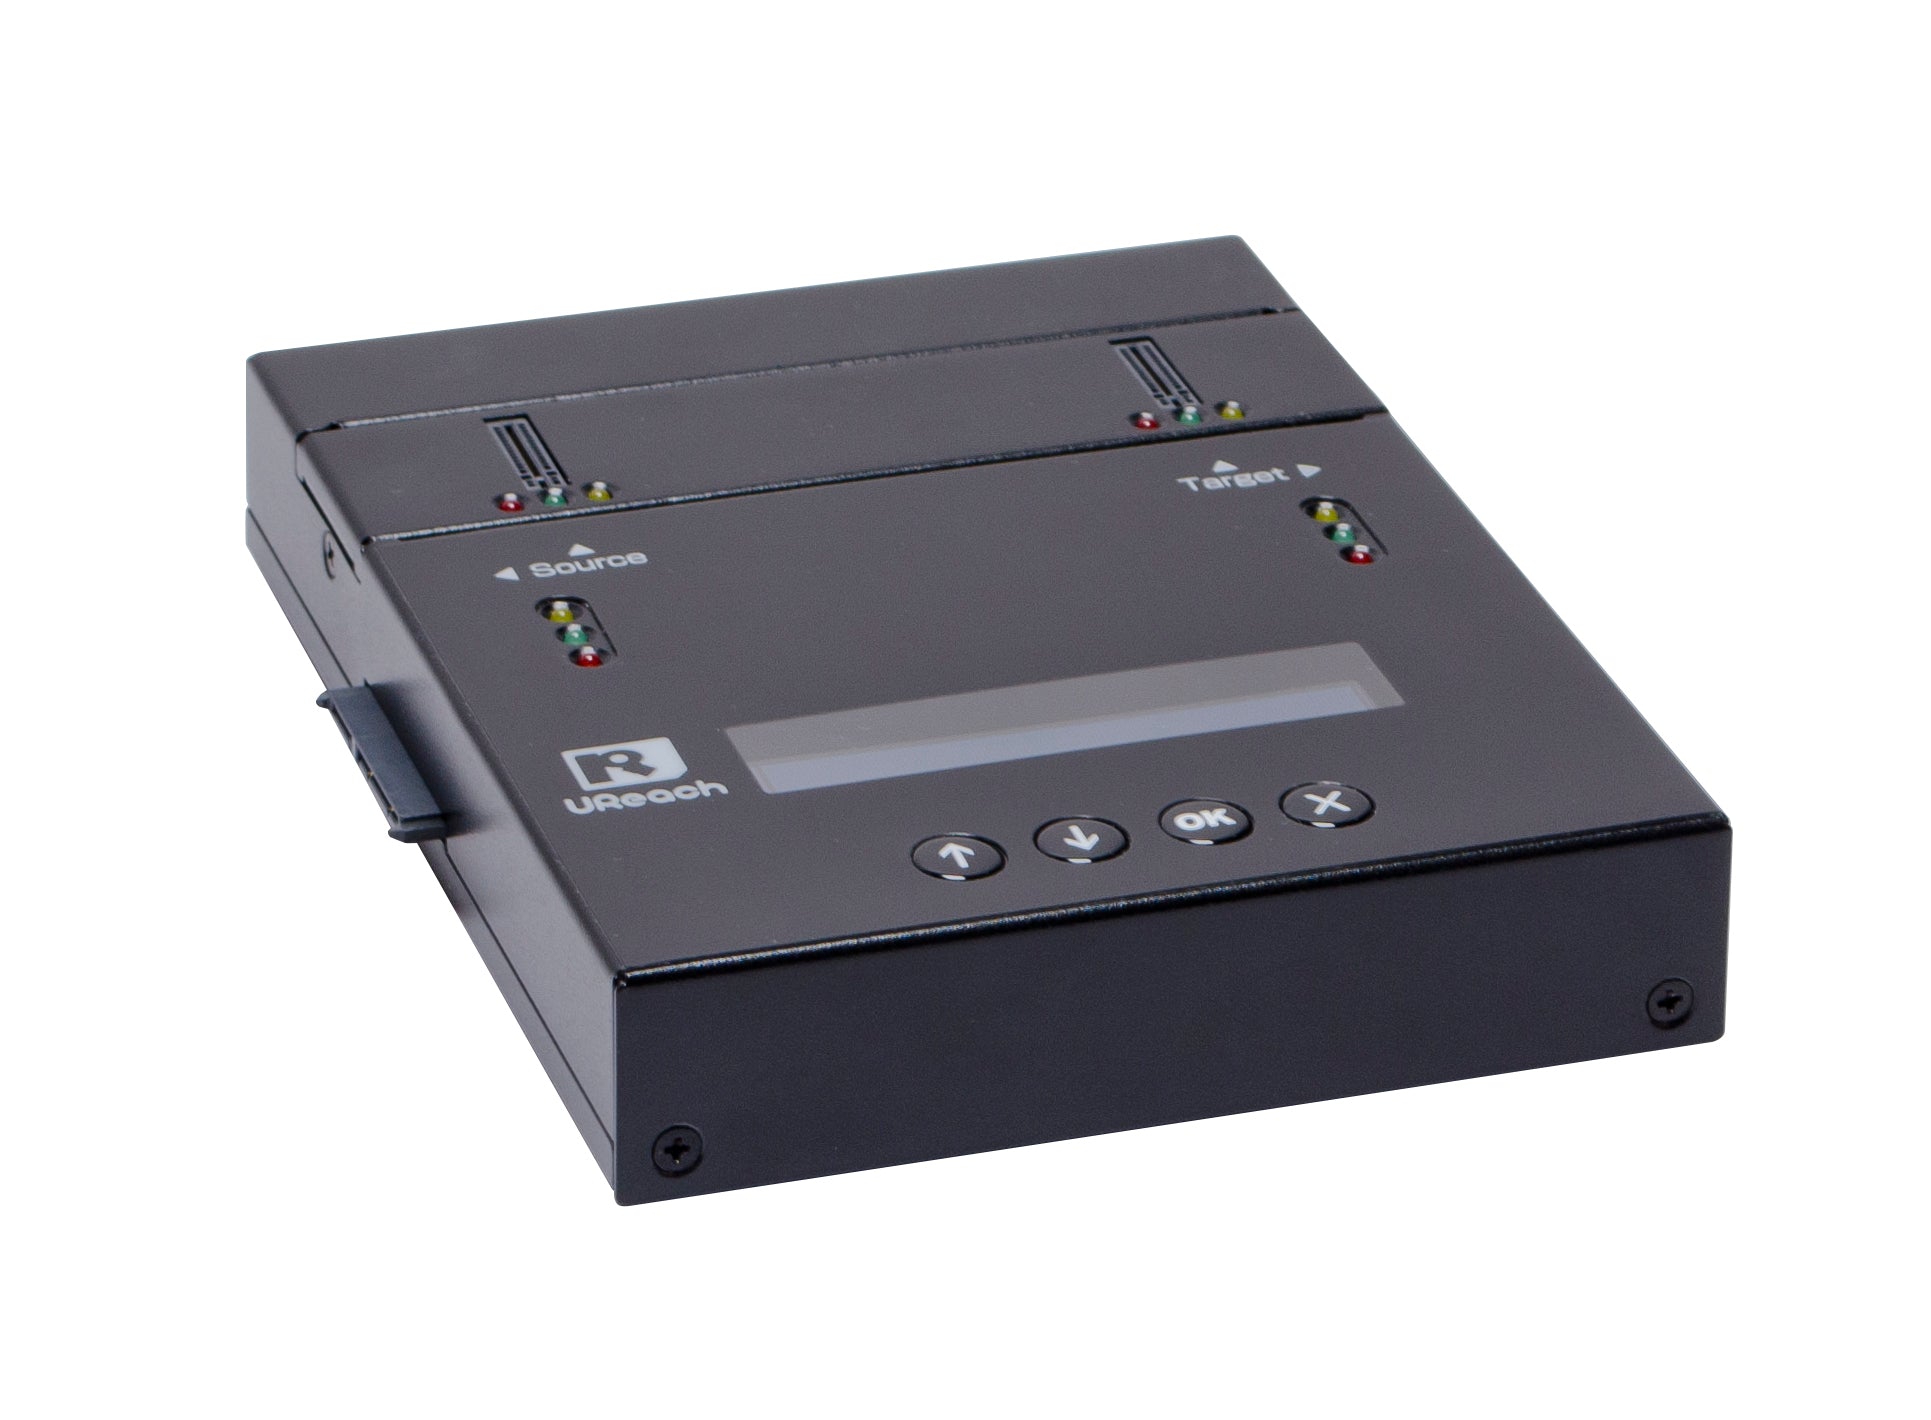 U-Reach SP151 1:1 Standalone M.2 NVMe/SATA Duplicator and Eraser for NVME & SATA devices, Ultra high speed of 24GB/min